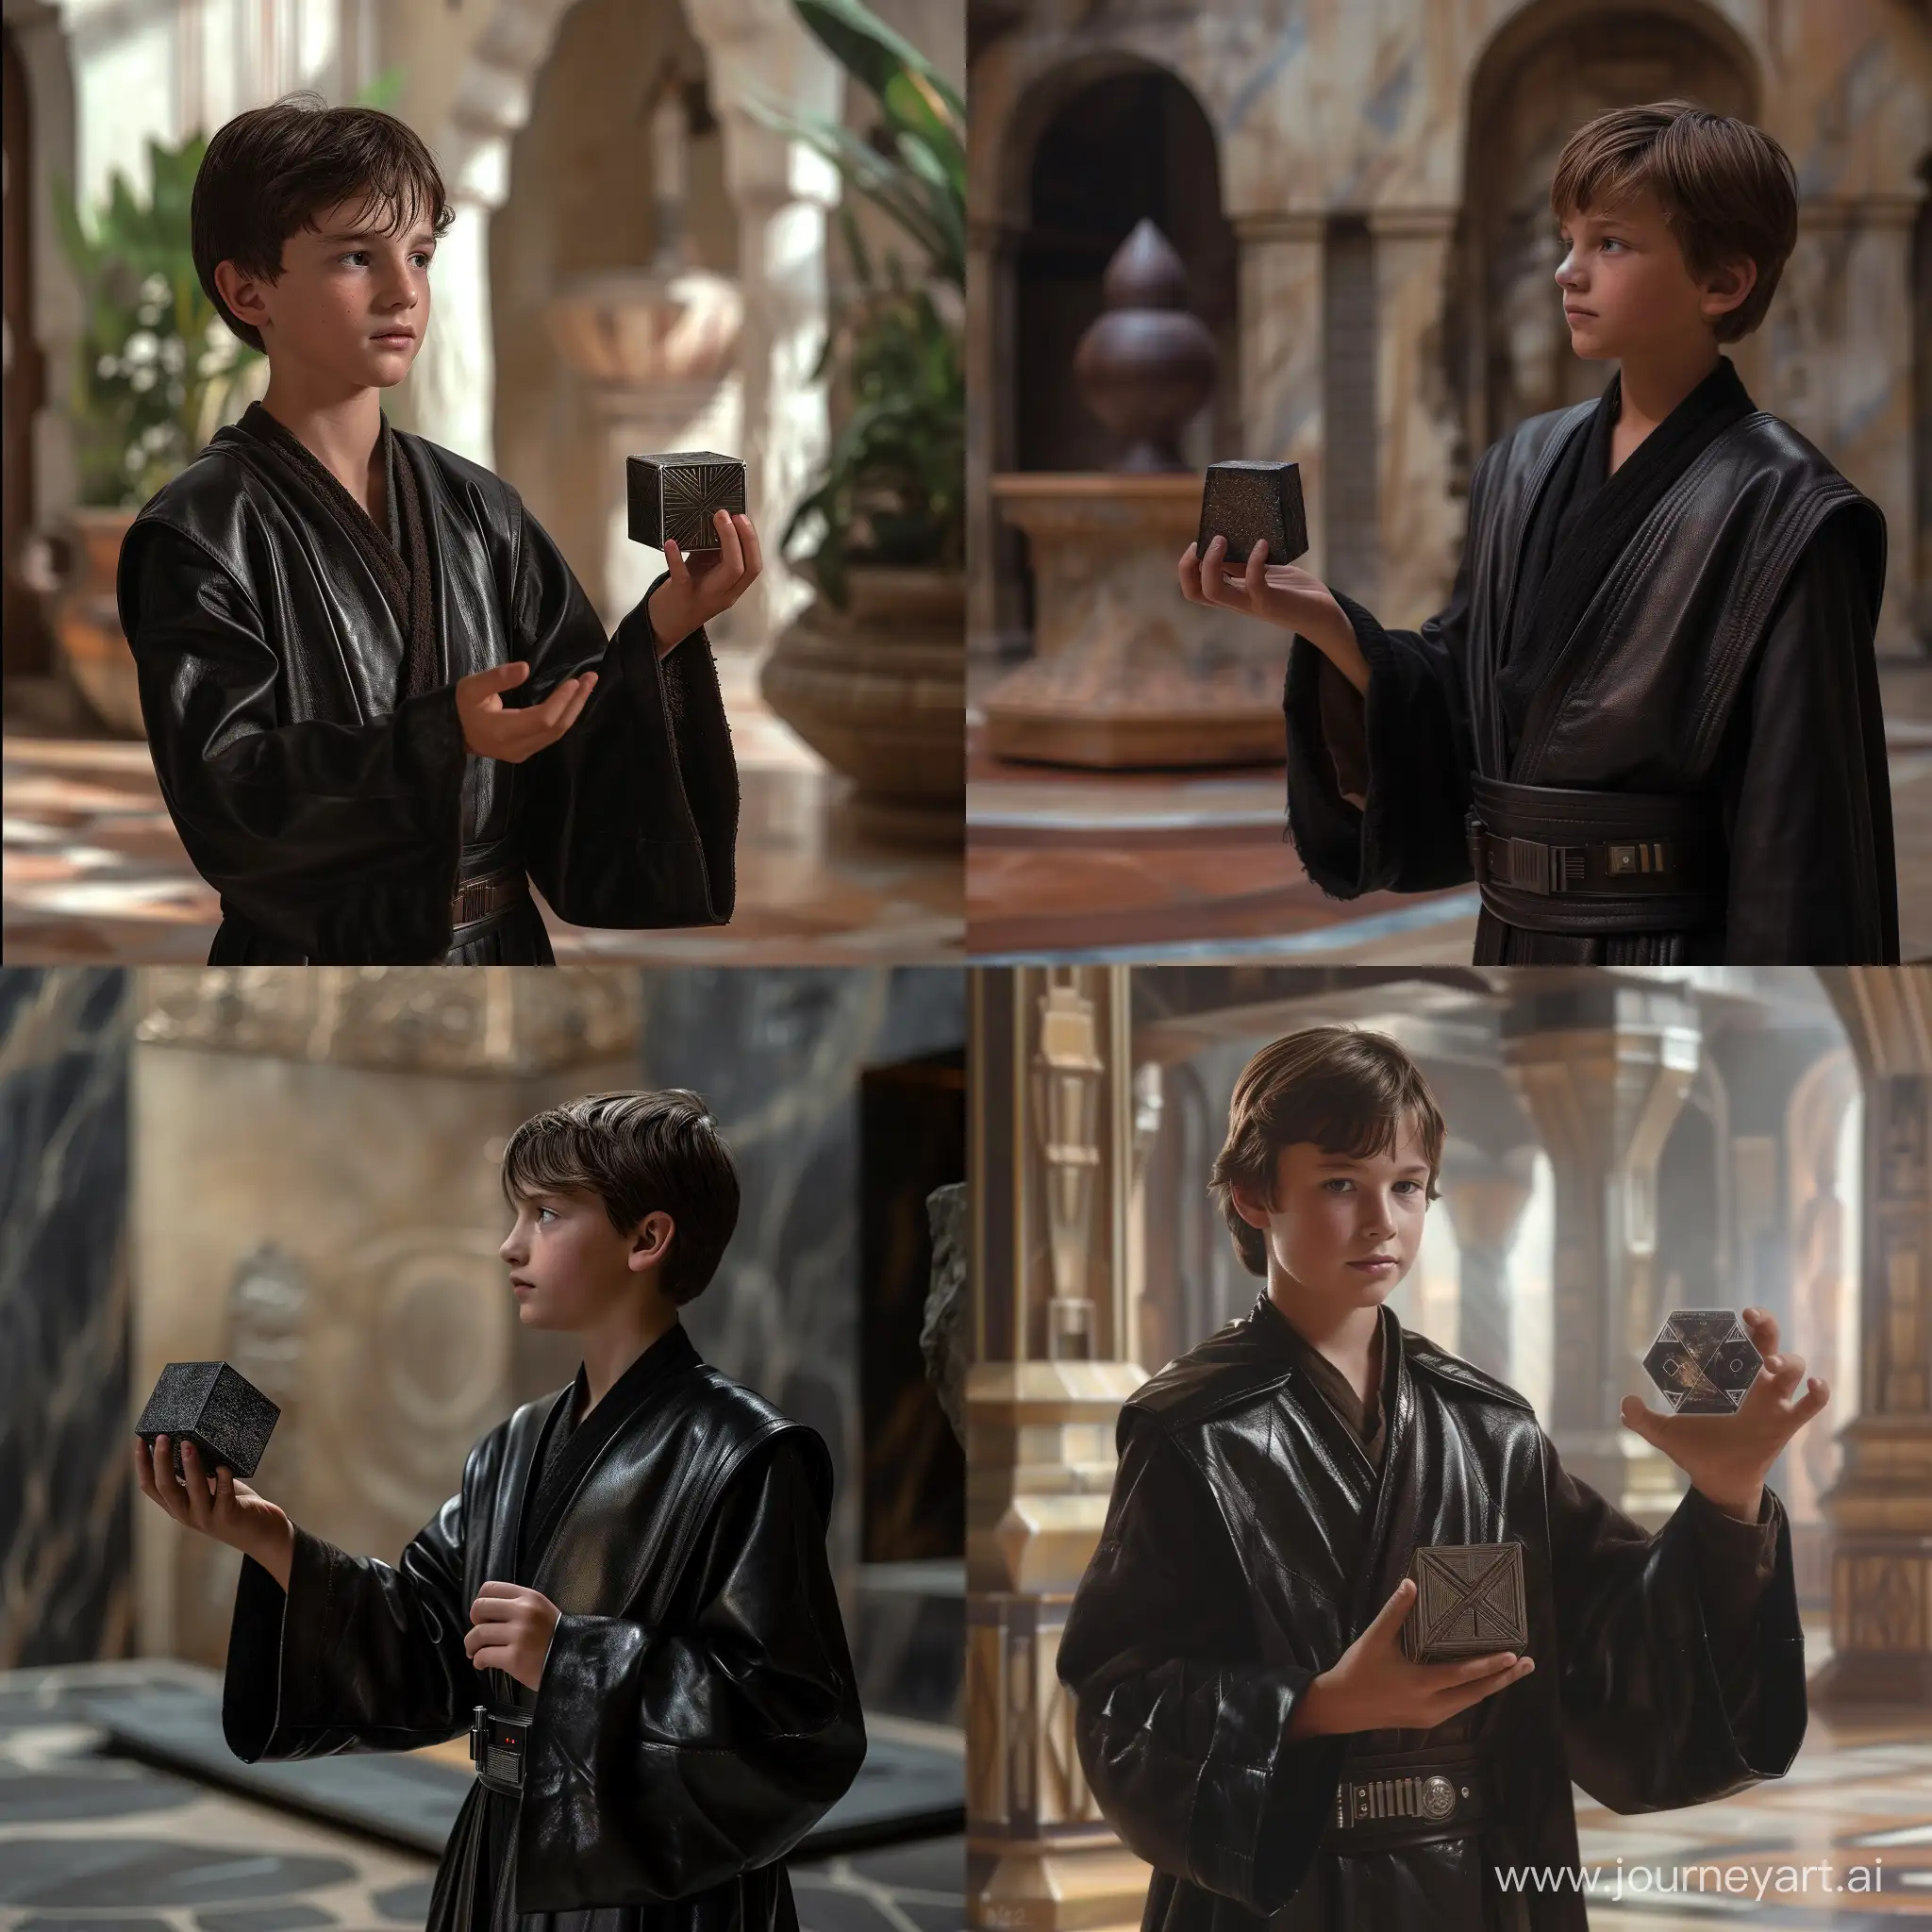 Young-Jedi-Apprentice-with-Holocron-in-Temple